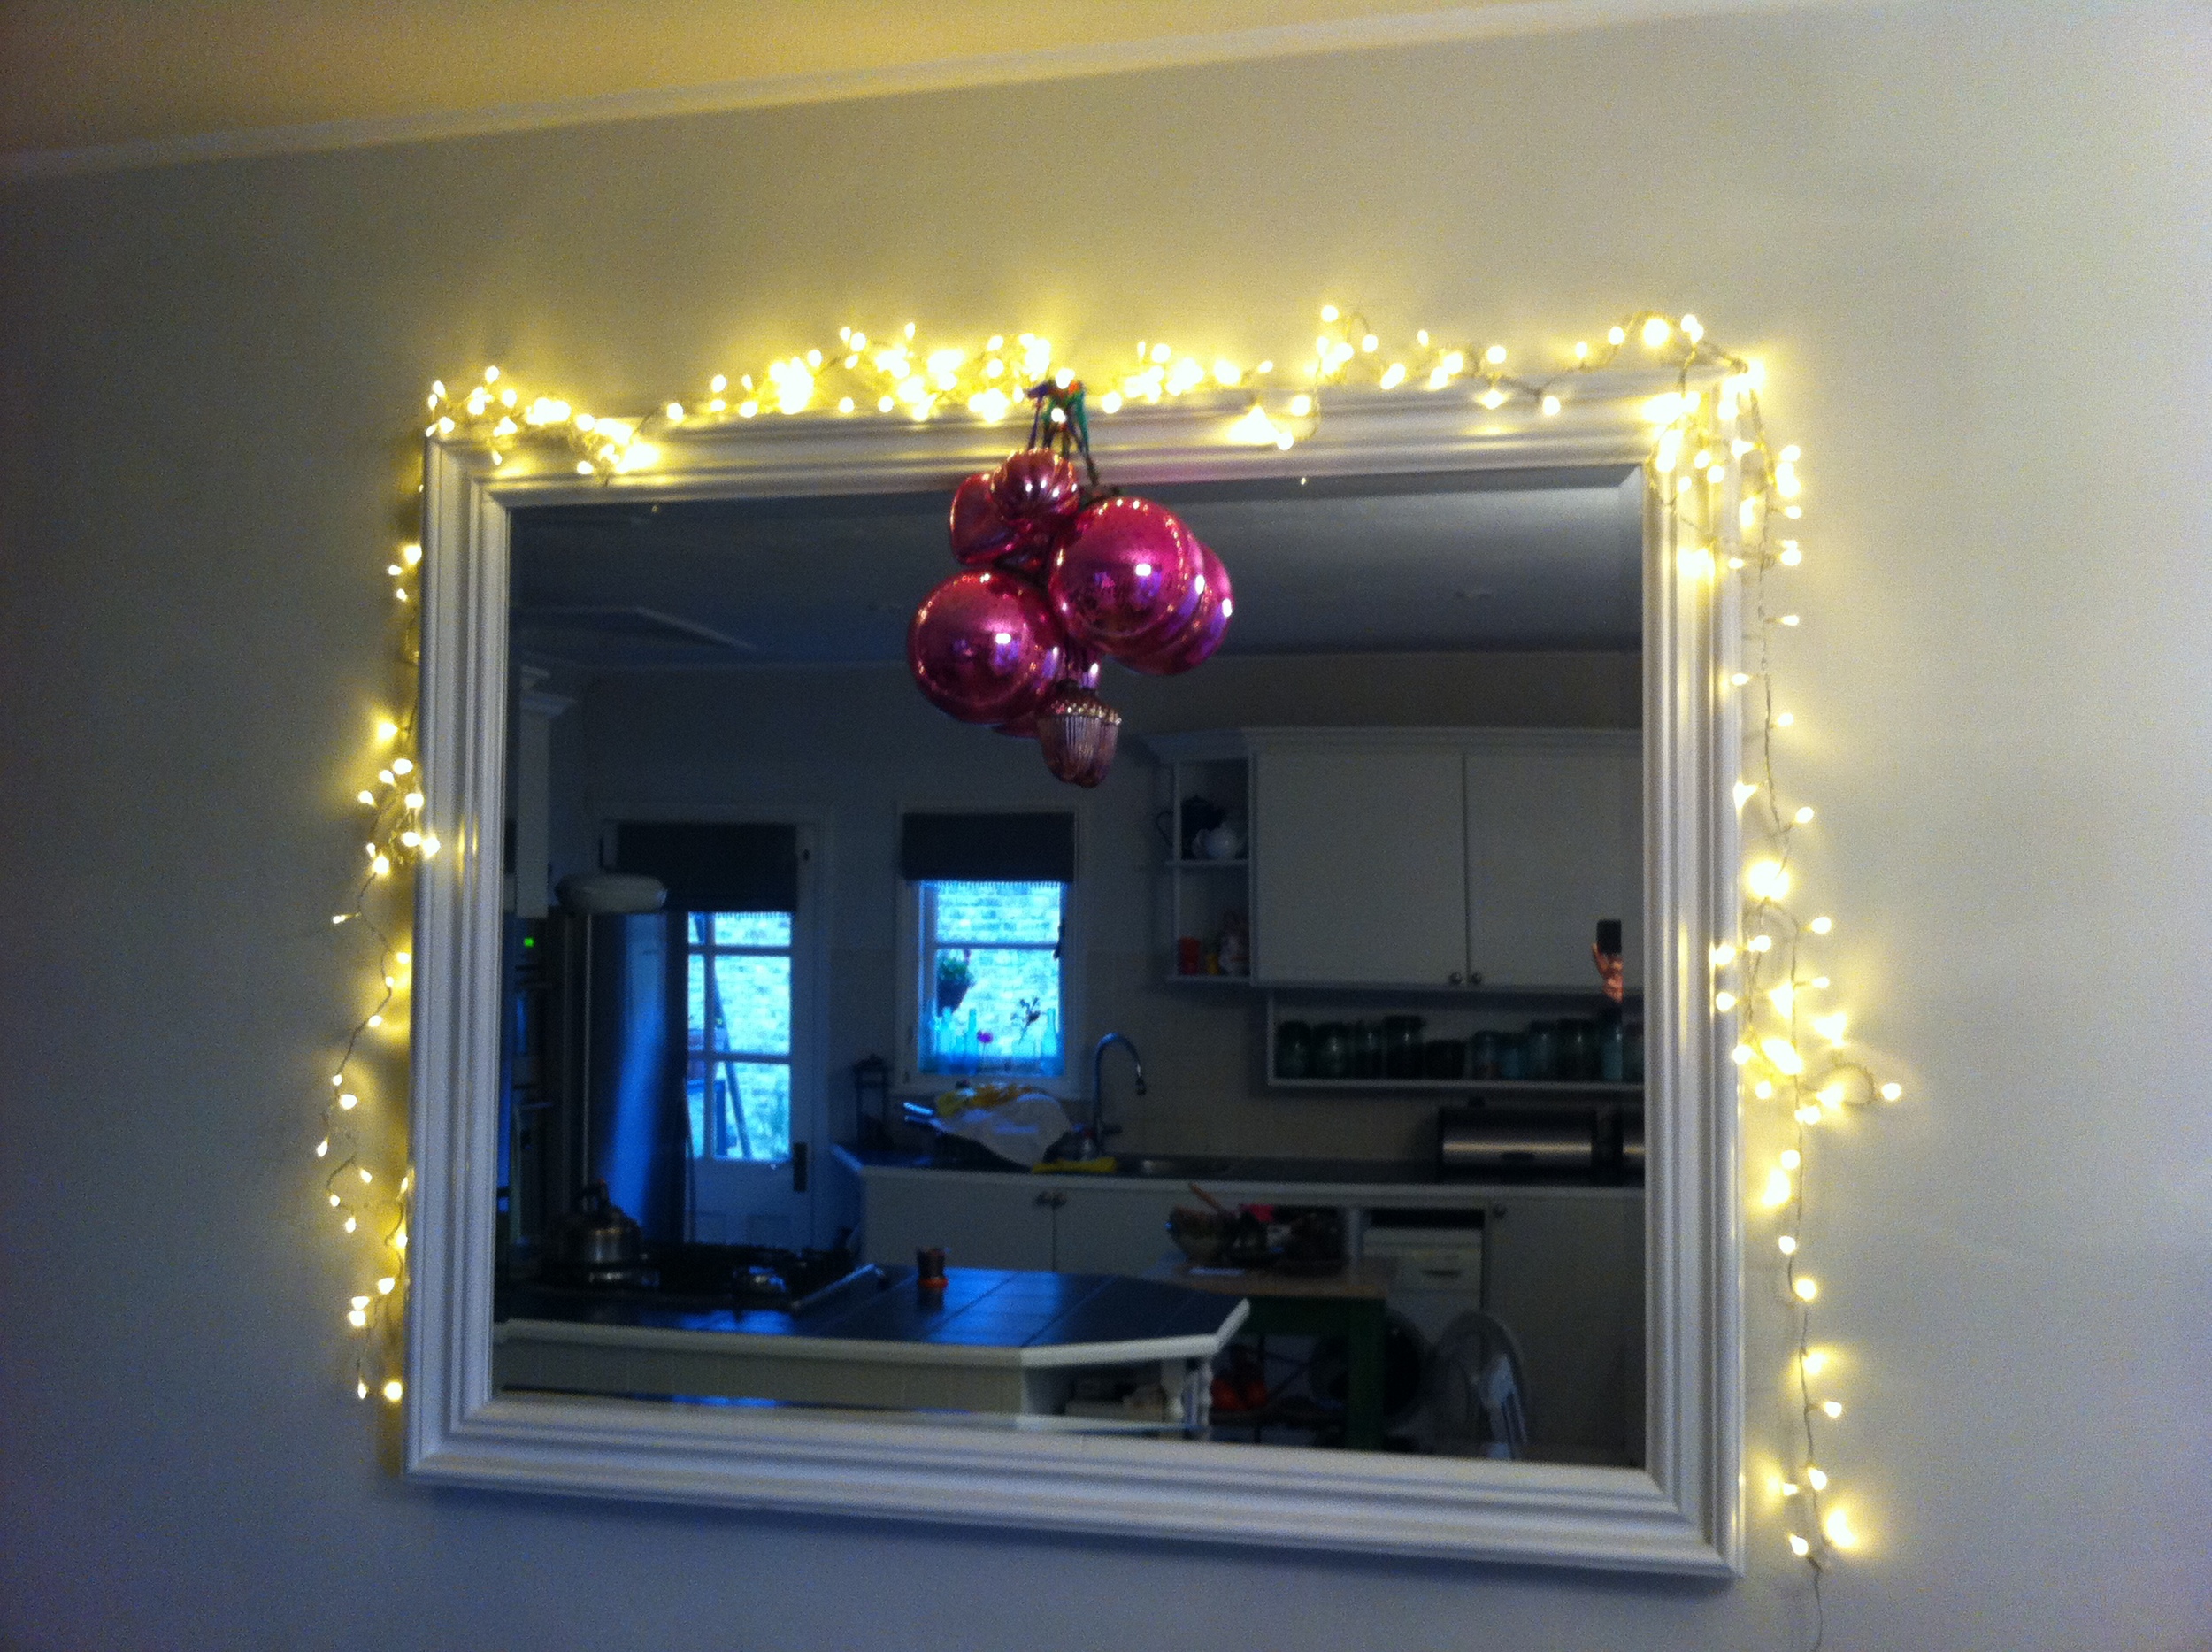  Always decorate your mirrors as it adds real sparkle to a room 